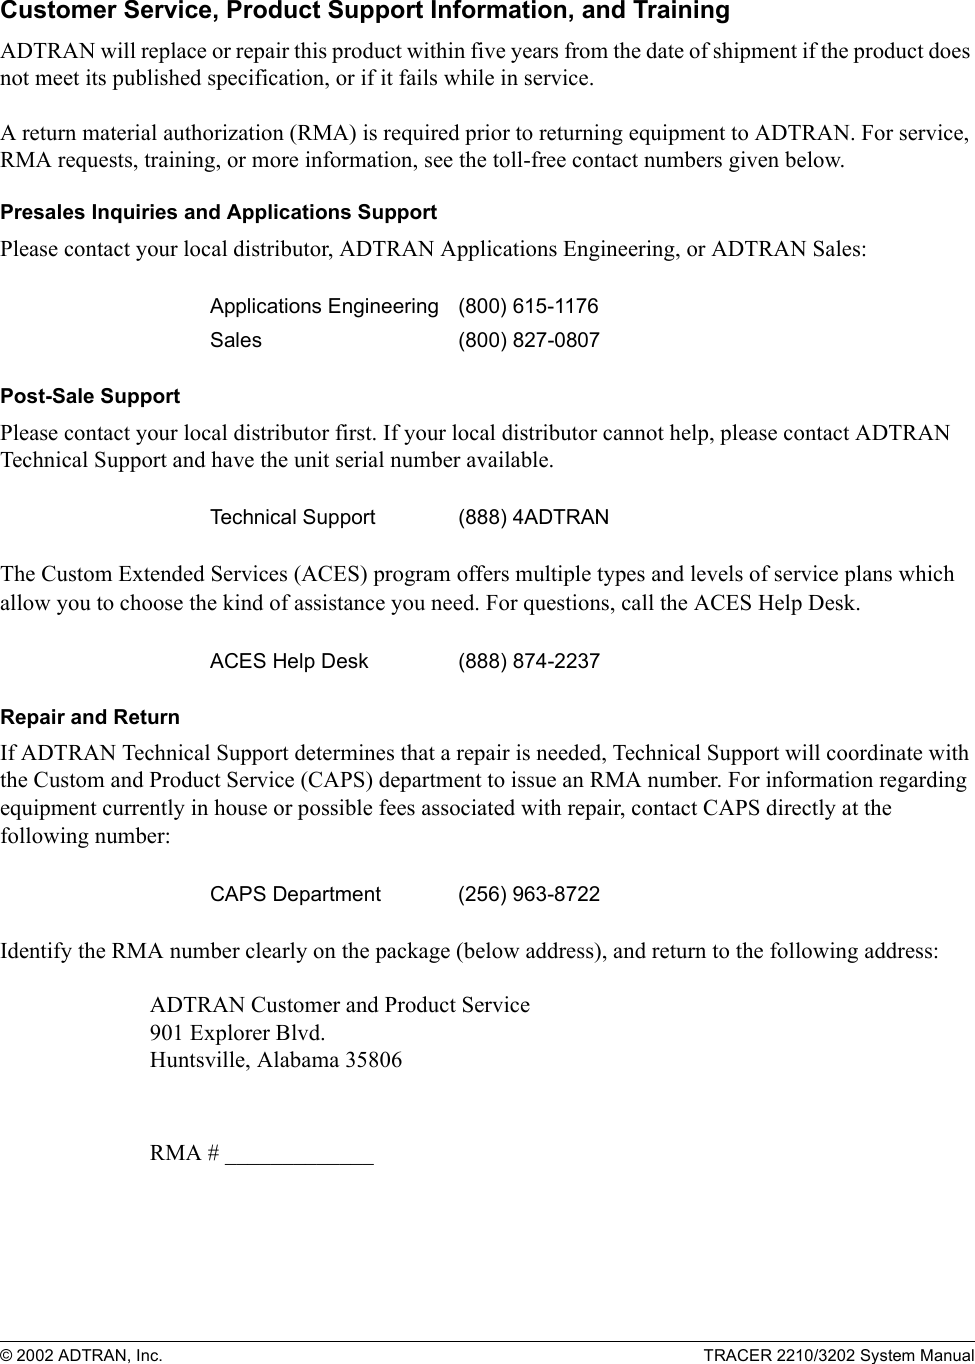 © 2002 ADTRAN, Inc. TRACER 2210/3202 System ManualCustomer Service, Product Support Information, and TrainingADTRAN will replace or repair this product within five years from the date of shipment if the product does not meet its published specification, or if it fails while in service. A return material authorization (RMA) is required prior to returning equipment to ADTRAN. For service, RMA requests, training, or more information, see the toll-free contact numbers given below.Presales Inquiries and Applications SupportPlease contact your local distributor, ADTRAN Applications Engineering, or ADTRAN Sales:Post-Sale SupportPlease contact your local distributor first. If your local distributor cannot help, please contact ADTRAN Technical Support and have the unit serial number available.The Custom Extended Services (ACES) program offers multiple types and levels of service plans which allow you to choose the kind of assistance you need. For questions, call the ACES Help Desk. Repair and ReturnIf ADTRAN Technical Support determines that a repair is needed, Technical Support will coordinate with the Custom and Product Service (CAPS) department to issue an RMA number. For information regarding equipment currently in house or possible fees associated with repair, contact CAPS directly at the following number:Identify the RMA number clearly on the package (below address), and return to the following address:ADTRAN Customer and Product Service901 Explorer Blvd.Huntsville, Alabama 35806RMA # _____________Applications Engineering (800) 615-1176Sales (800) 827-0807Technical Support (888) 4ADTRANACES Help Desk (888) 874-2237 CAPS Department (256) 963-8722 